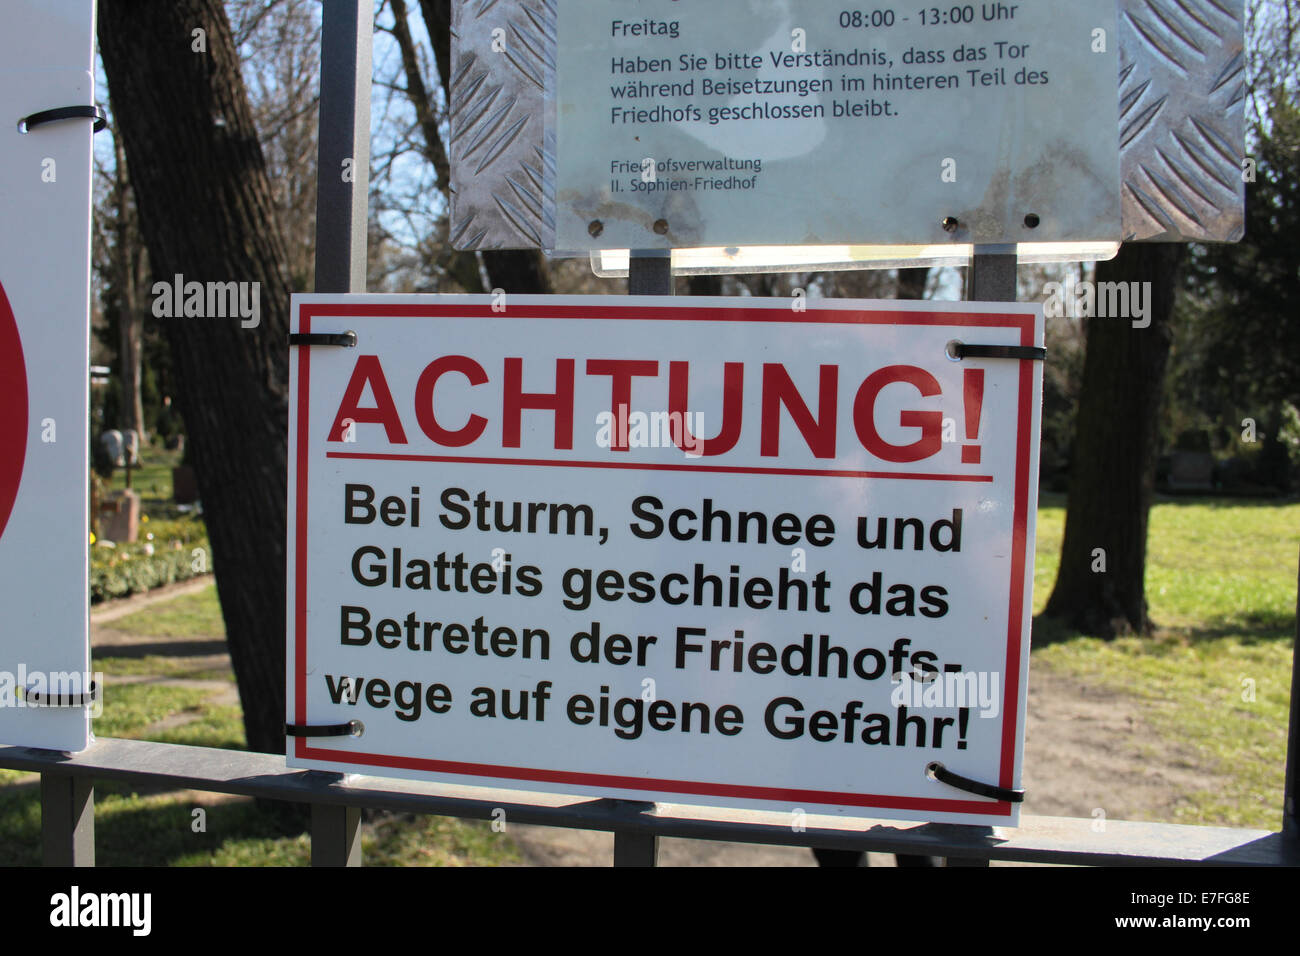 achtung sign in Berlin Stock Photo